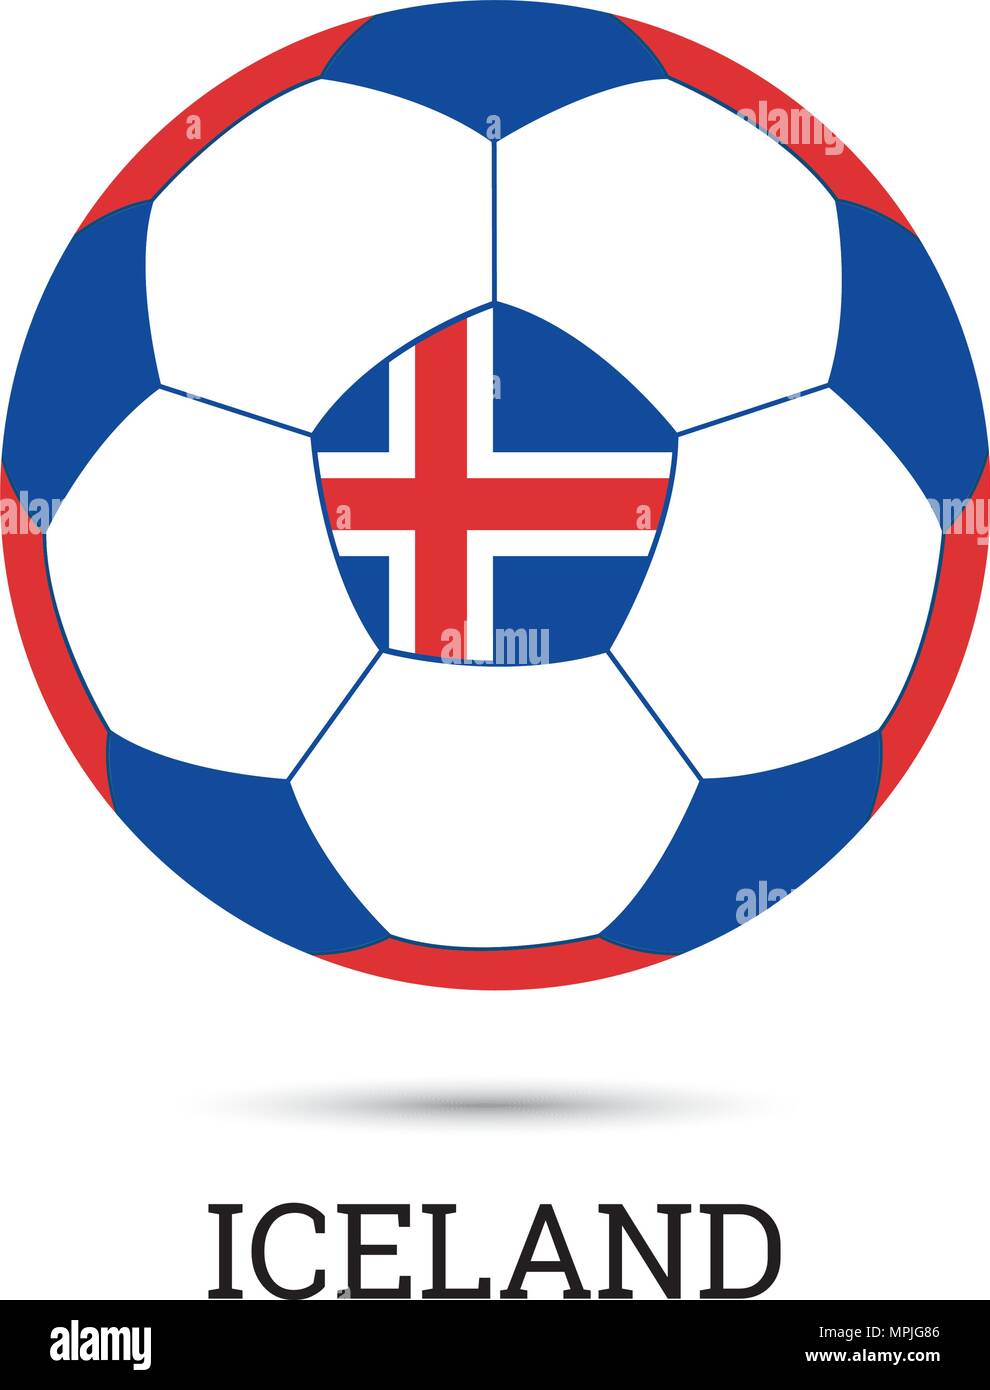 Soccer ball with Icelandic national colors  and emblem vector illustration Stock Vector